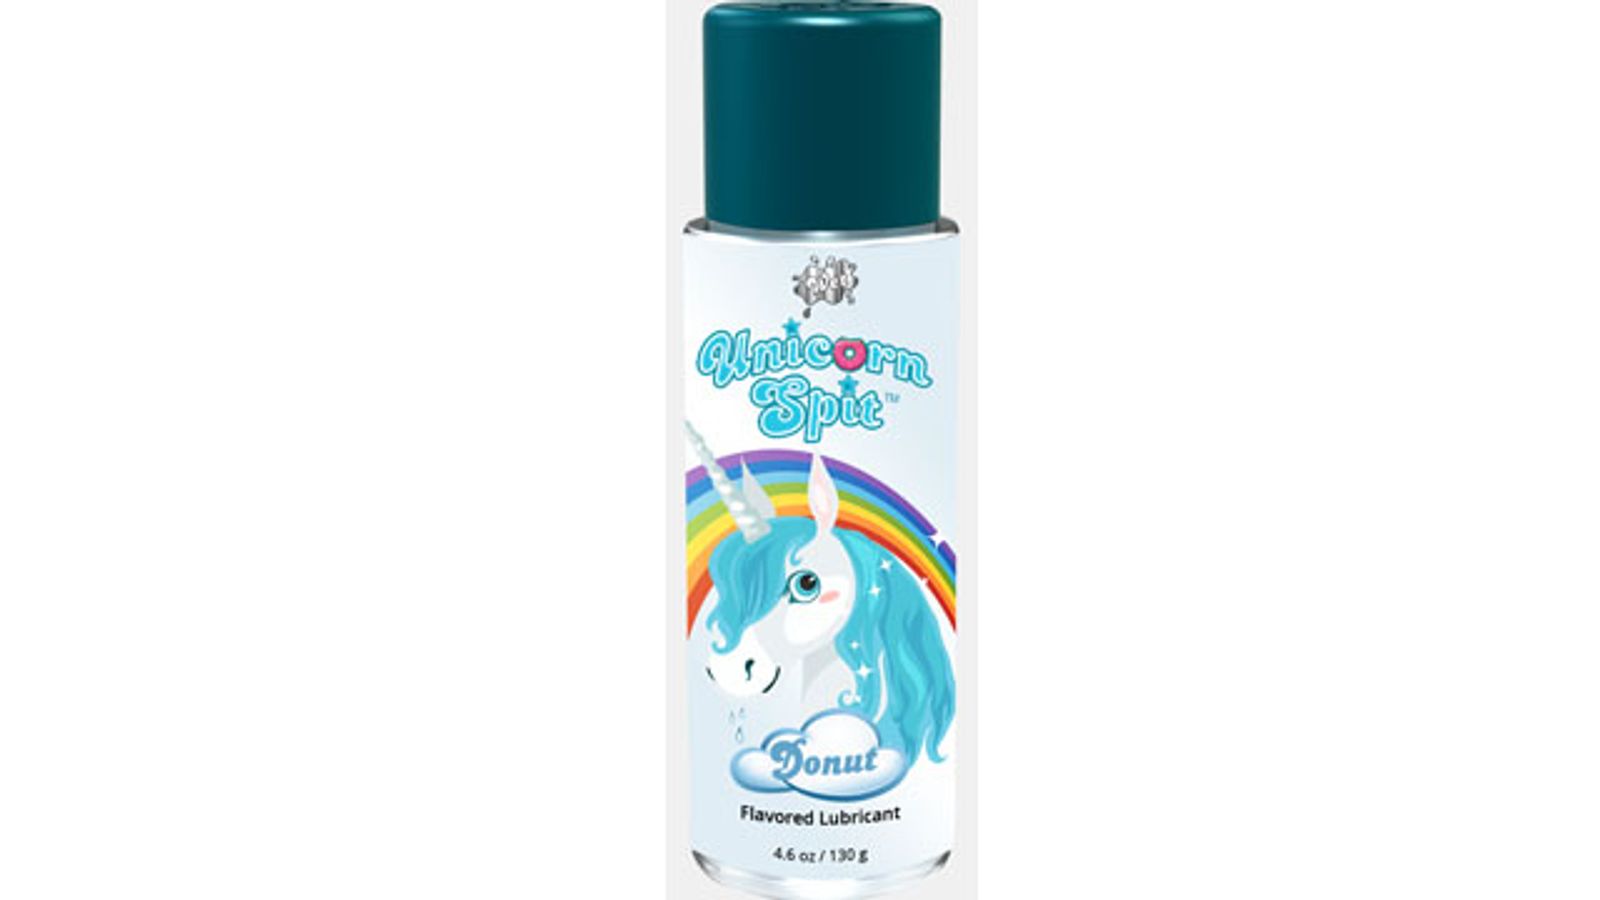 Trigg Labs Launches Wet Unicorn Spit Luxury Lubricant